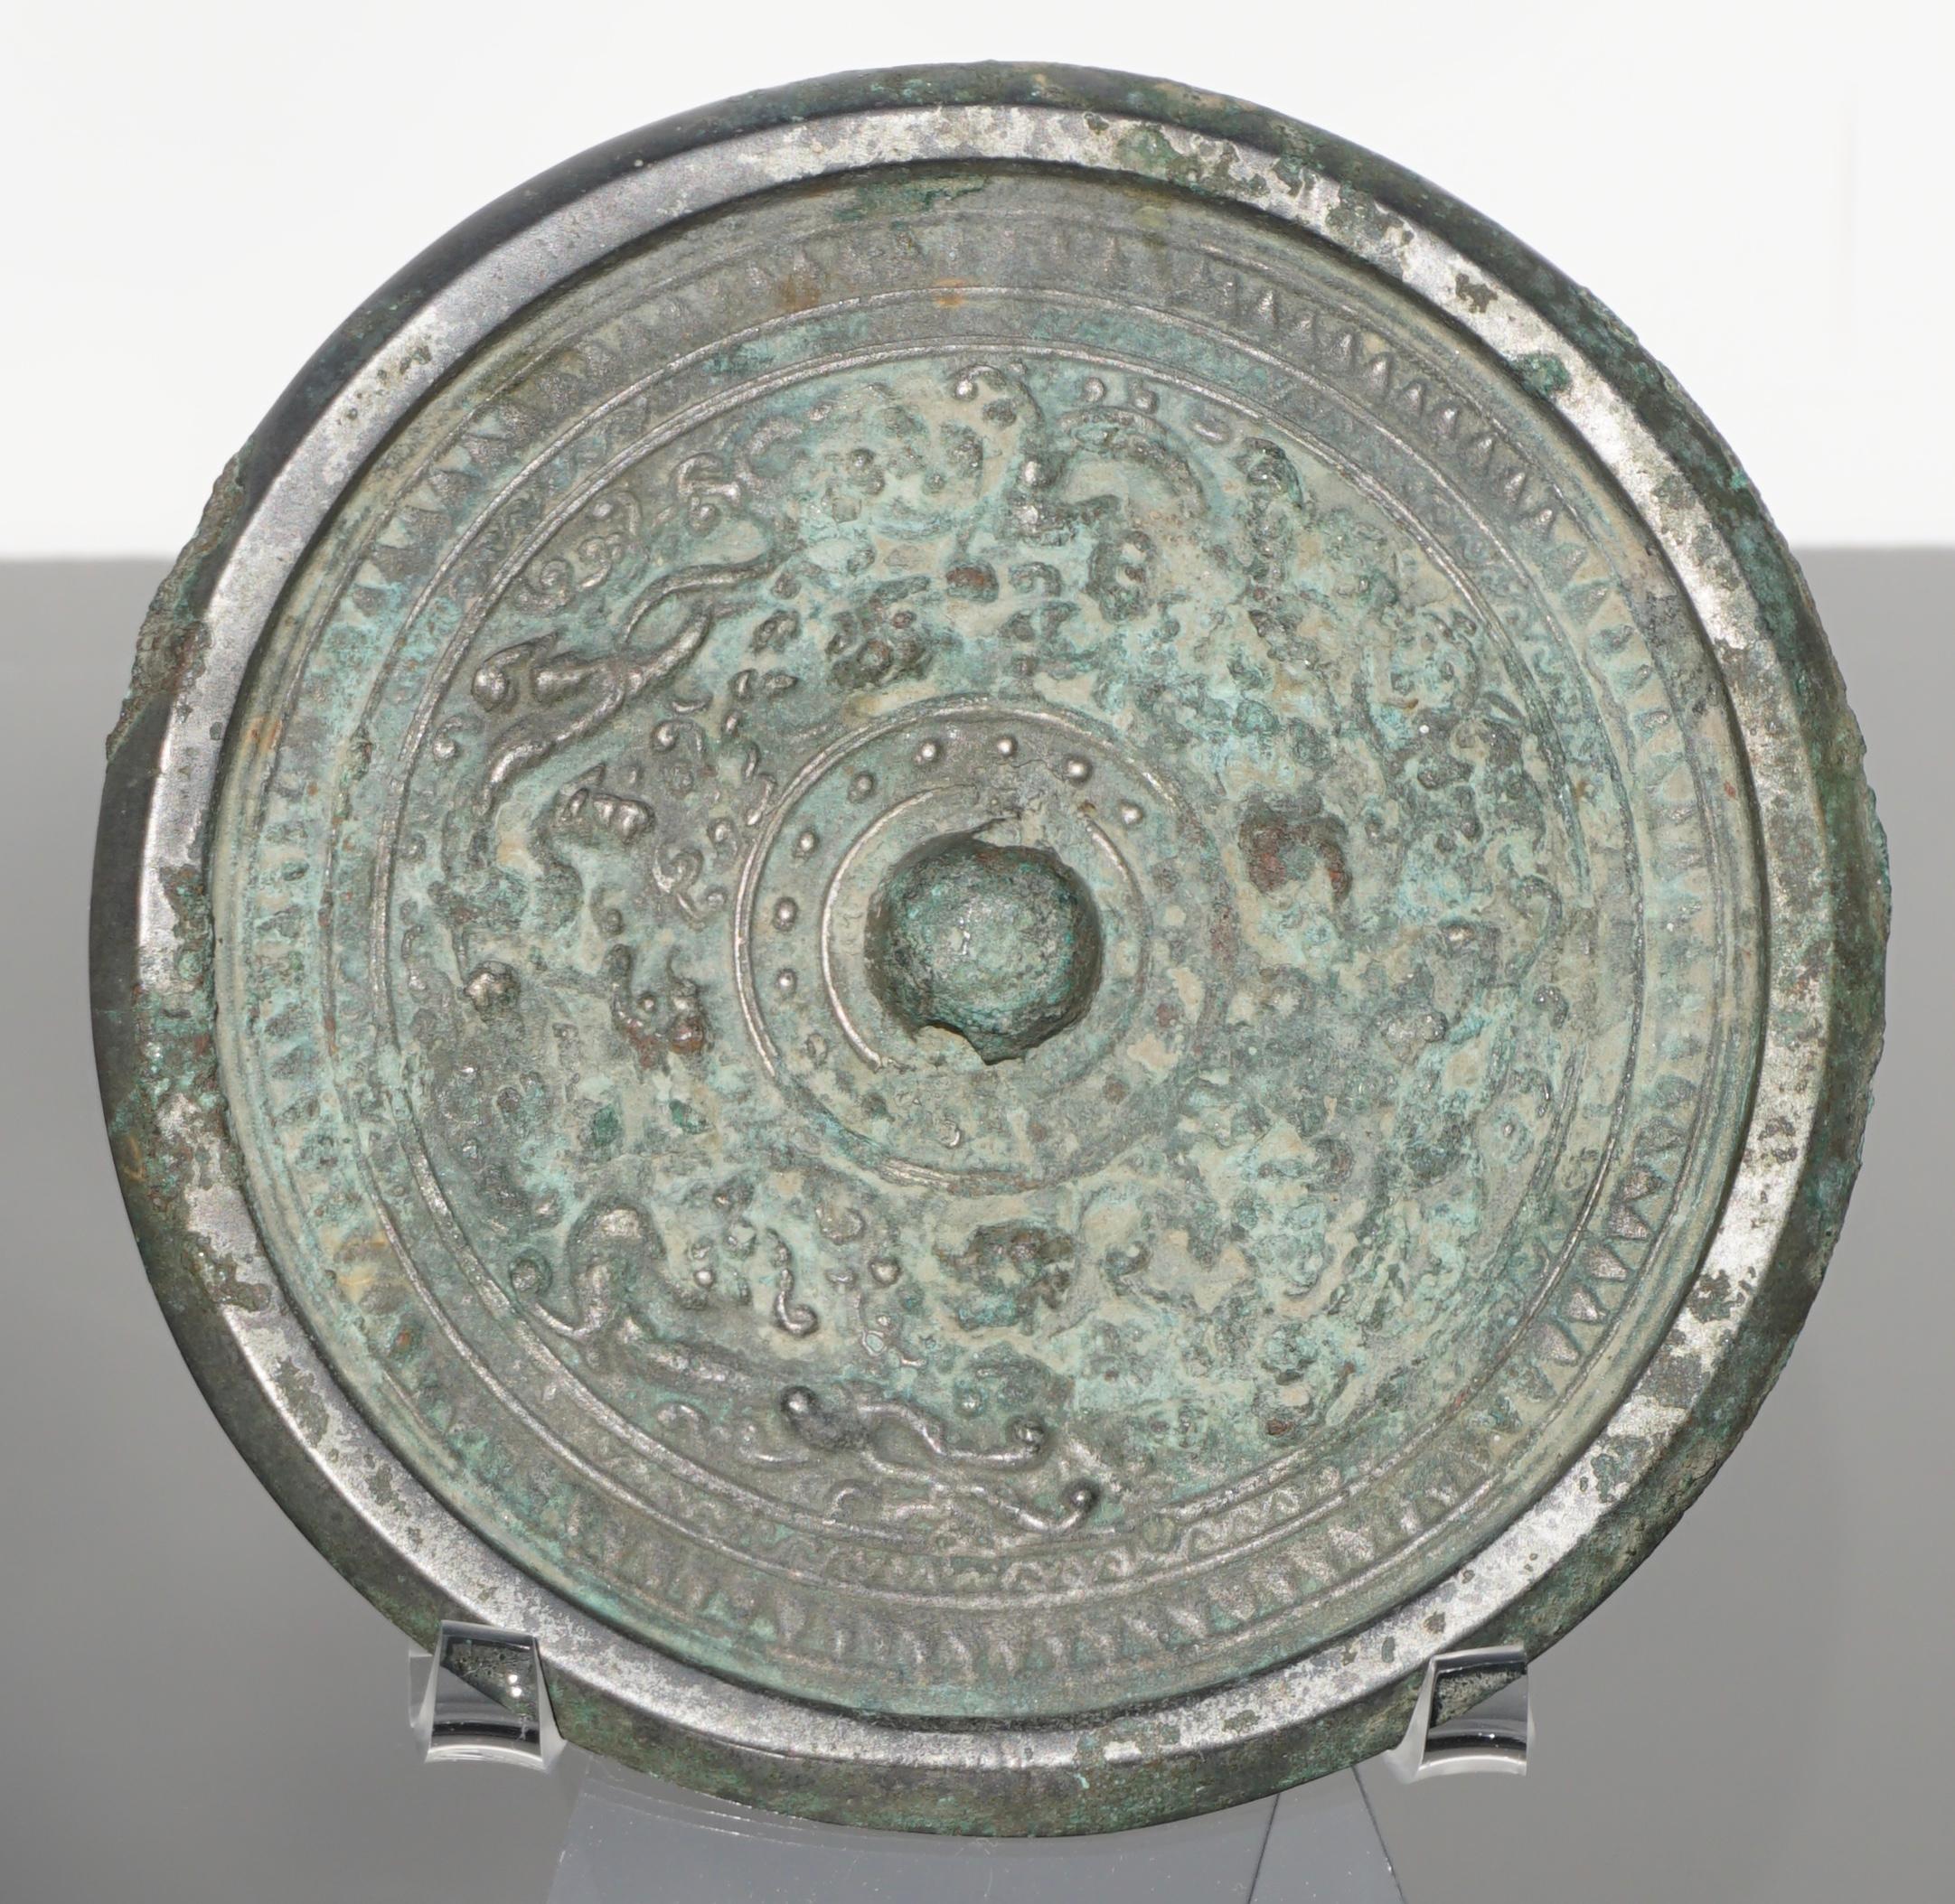 East Asia, China, 
Han Dynasty, ca. 206 BCE to 220 CE. 

A bronze mirror with cast motifs and a raised, nub-like handle. The handle is pierced through laterally, allowing the mirror to be worn. The cast motifs include flowing floral motifs and